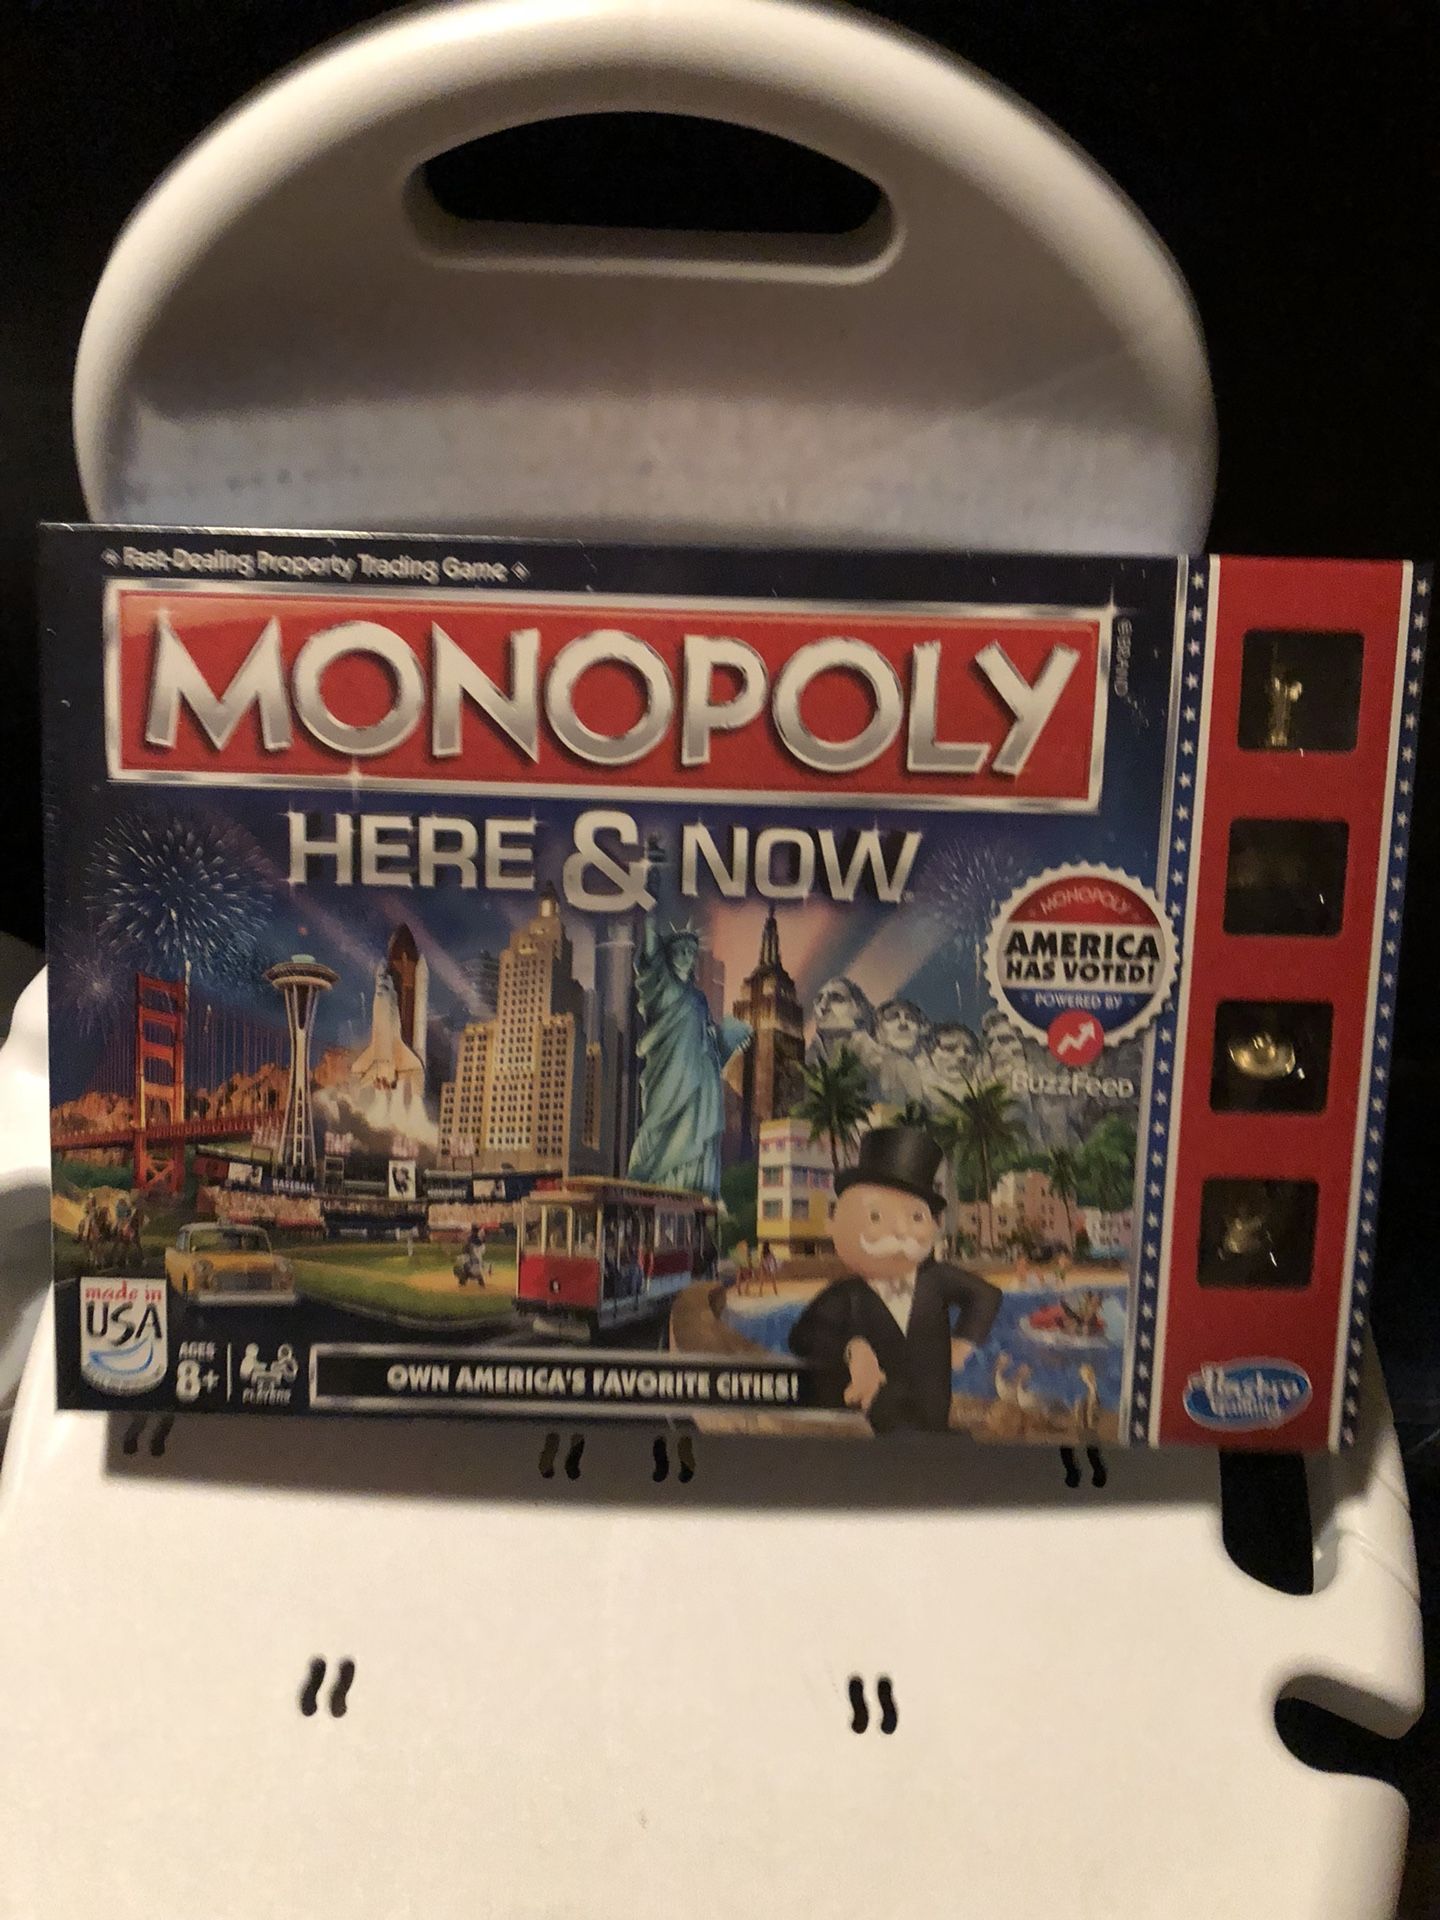 Monopoly Here & There Board Game. Last minute Christmas gift!